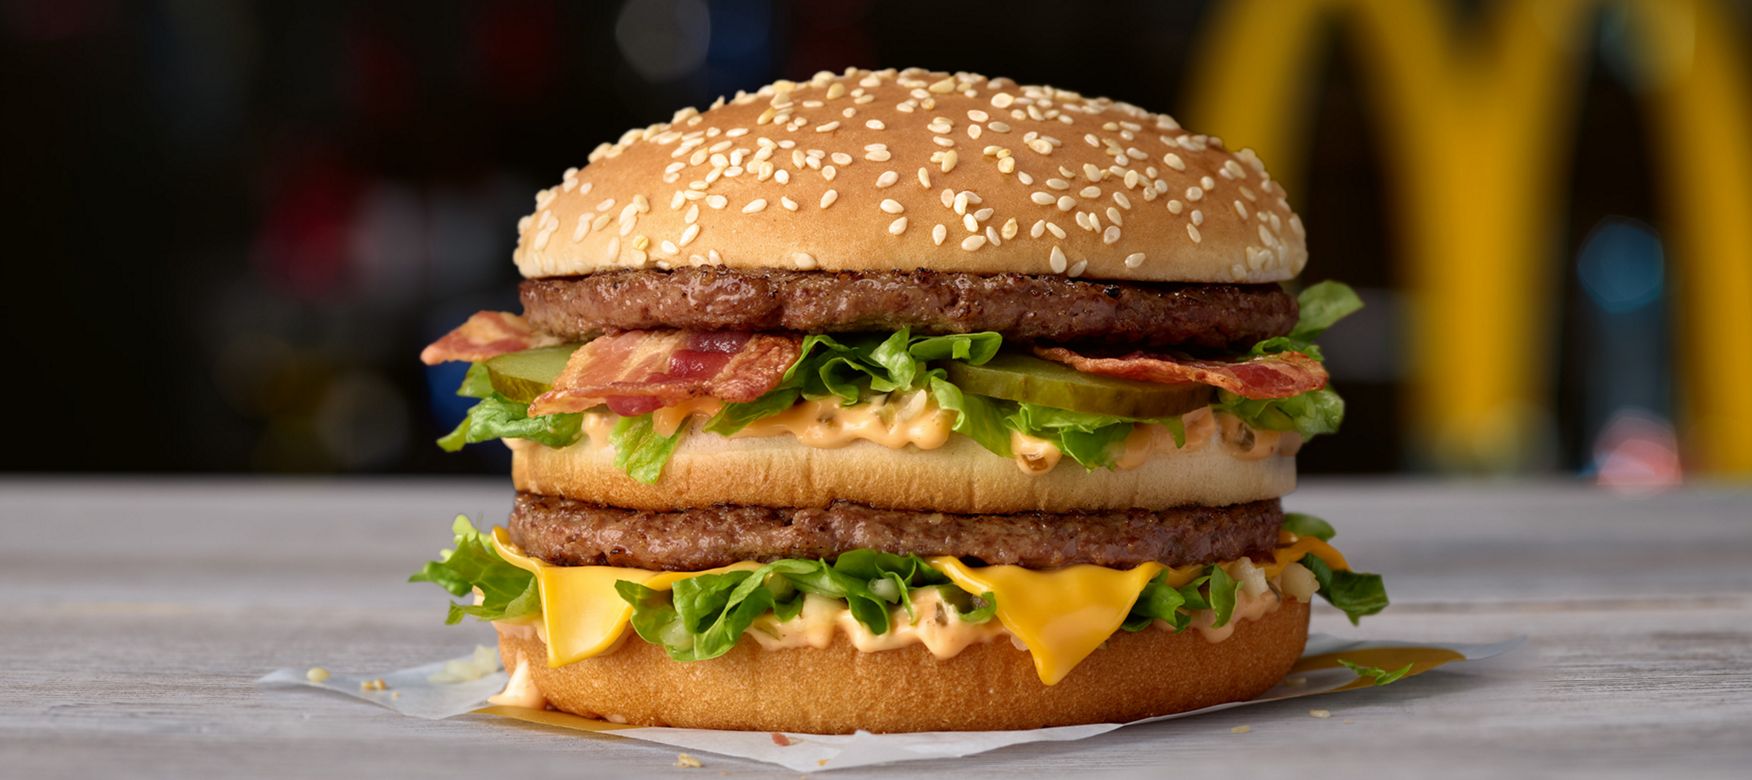 Grand Big Mac with Bacon on a table